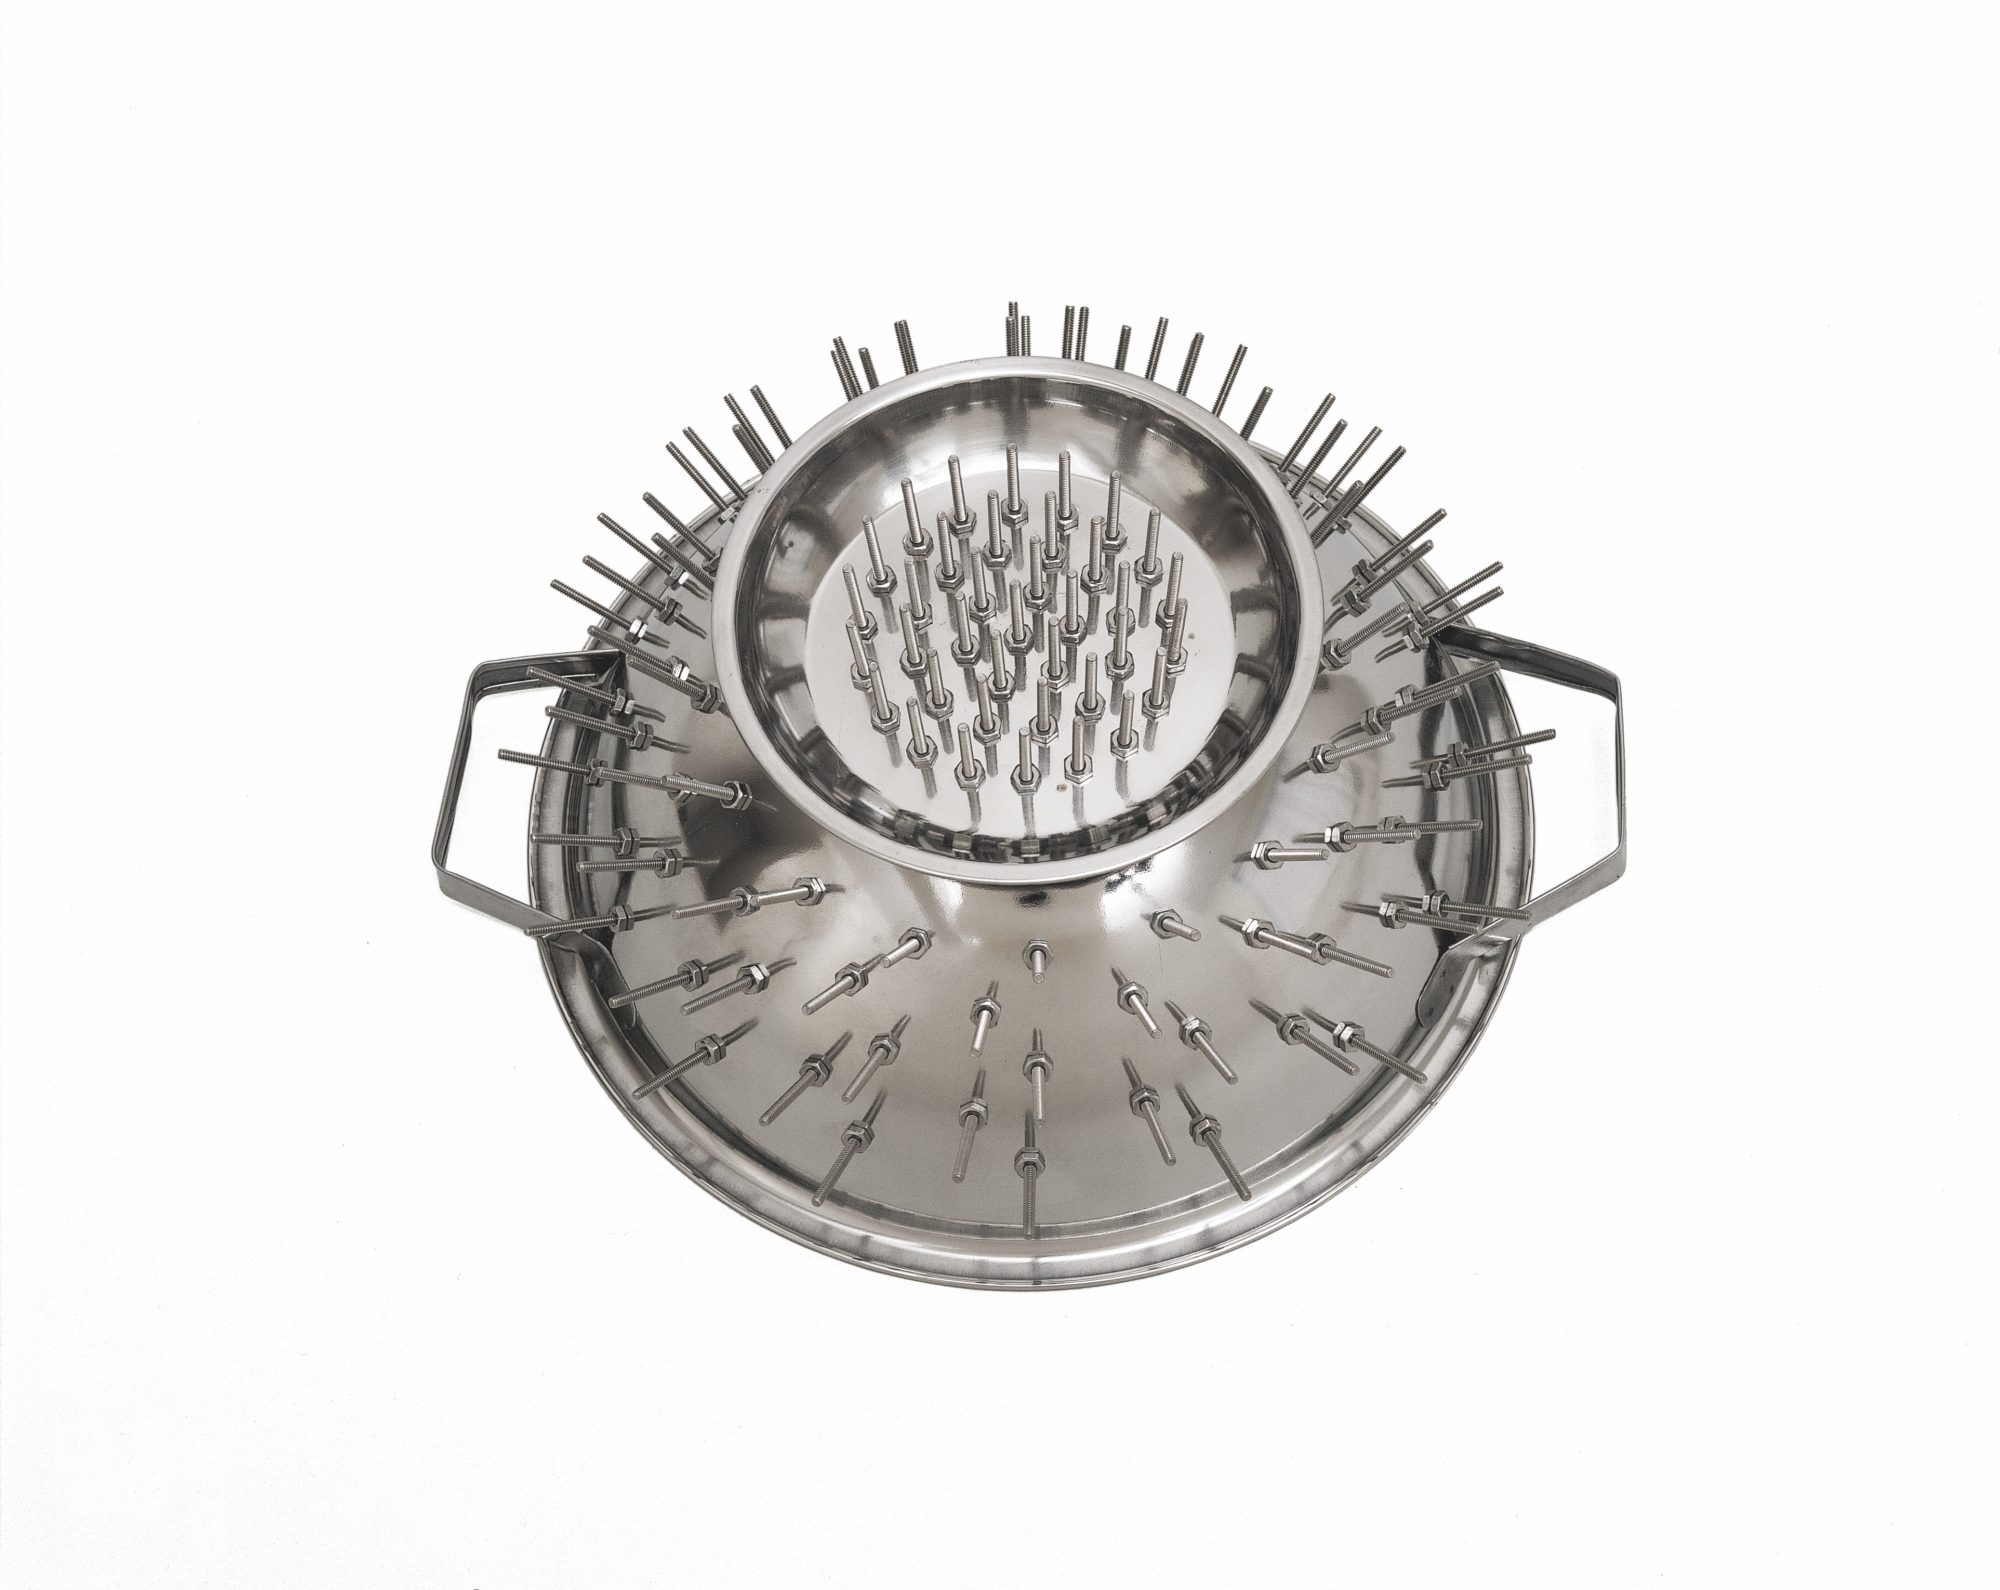 Stainless steel object resembling a pasta drainer, but with rods sticking out in place of holes